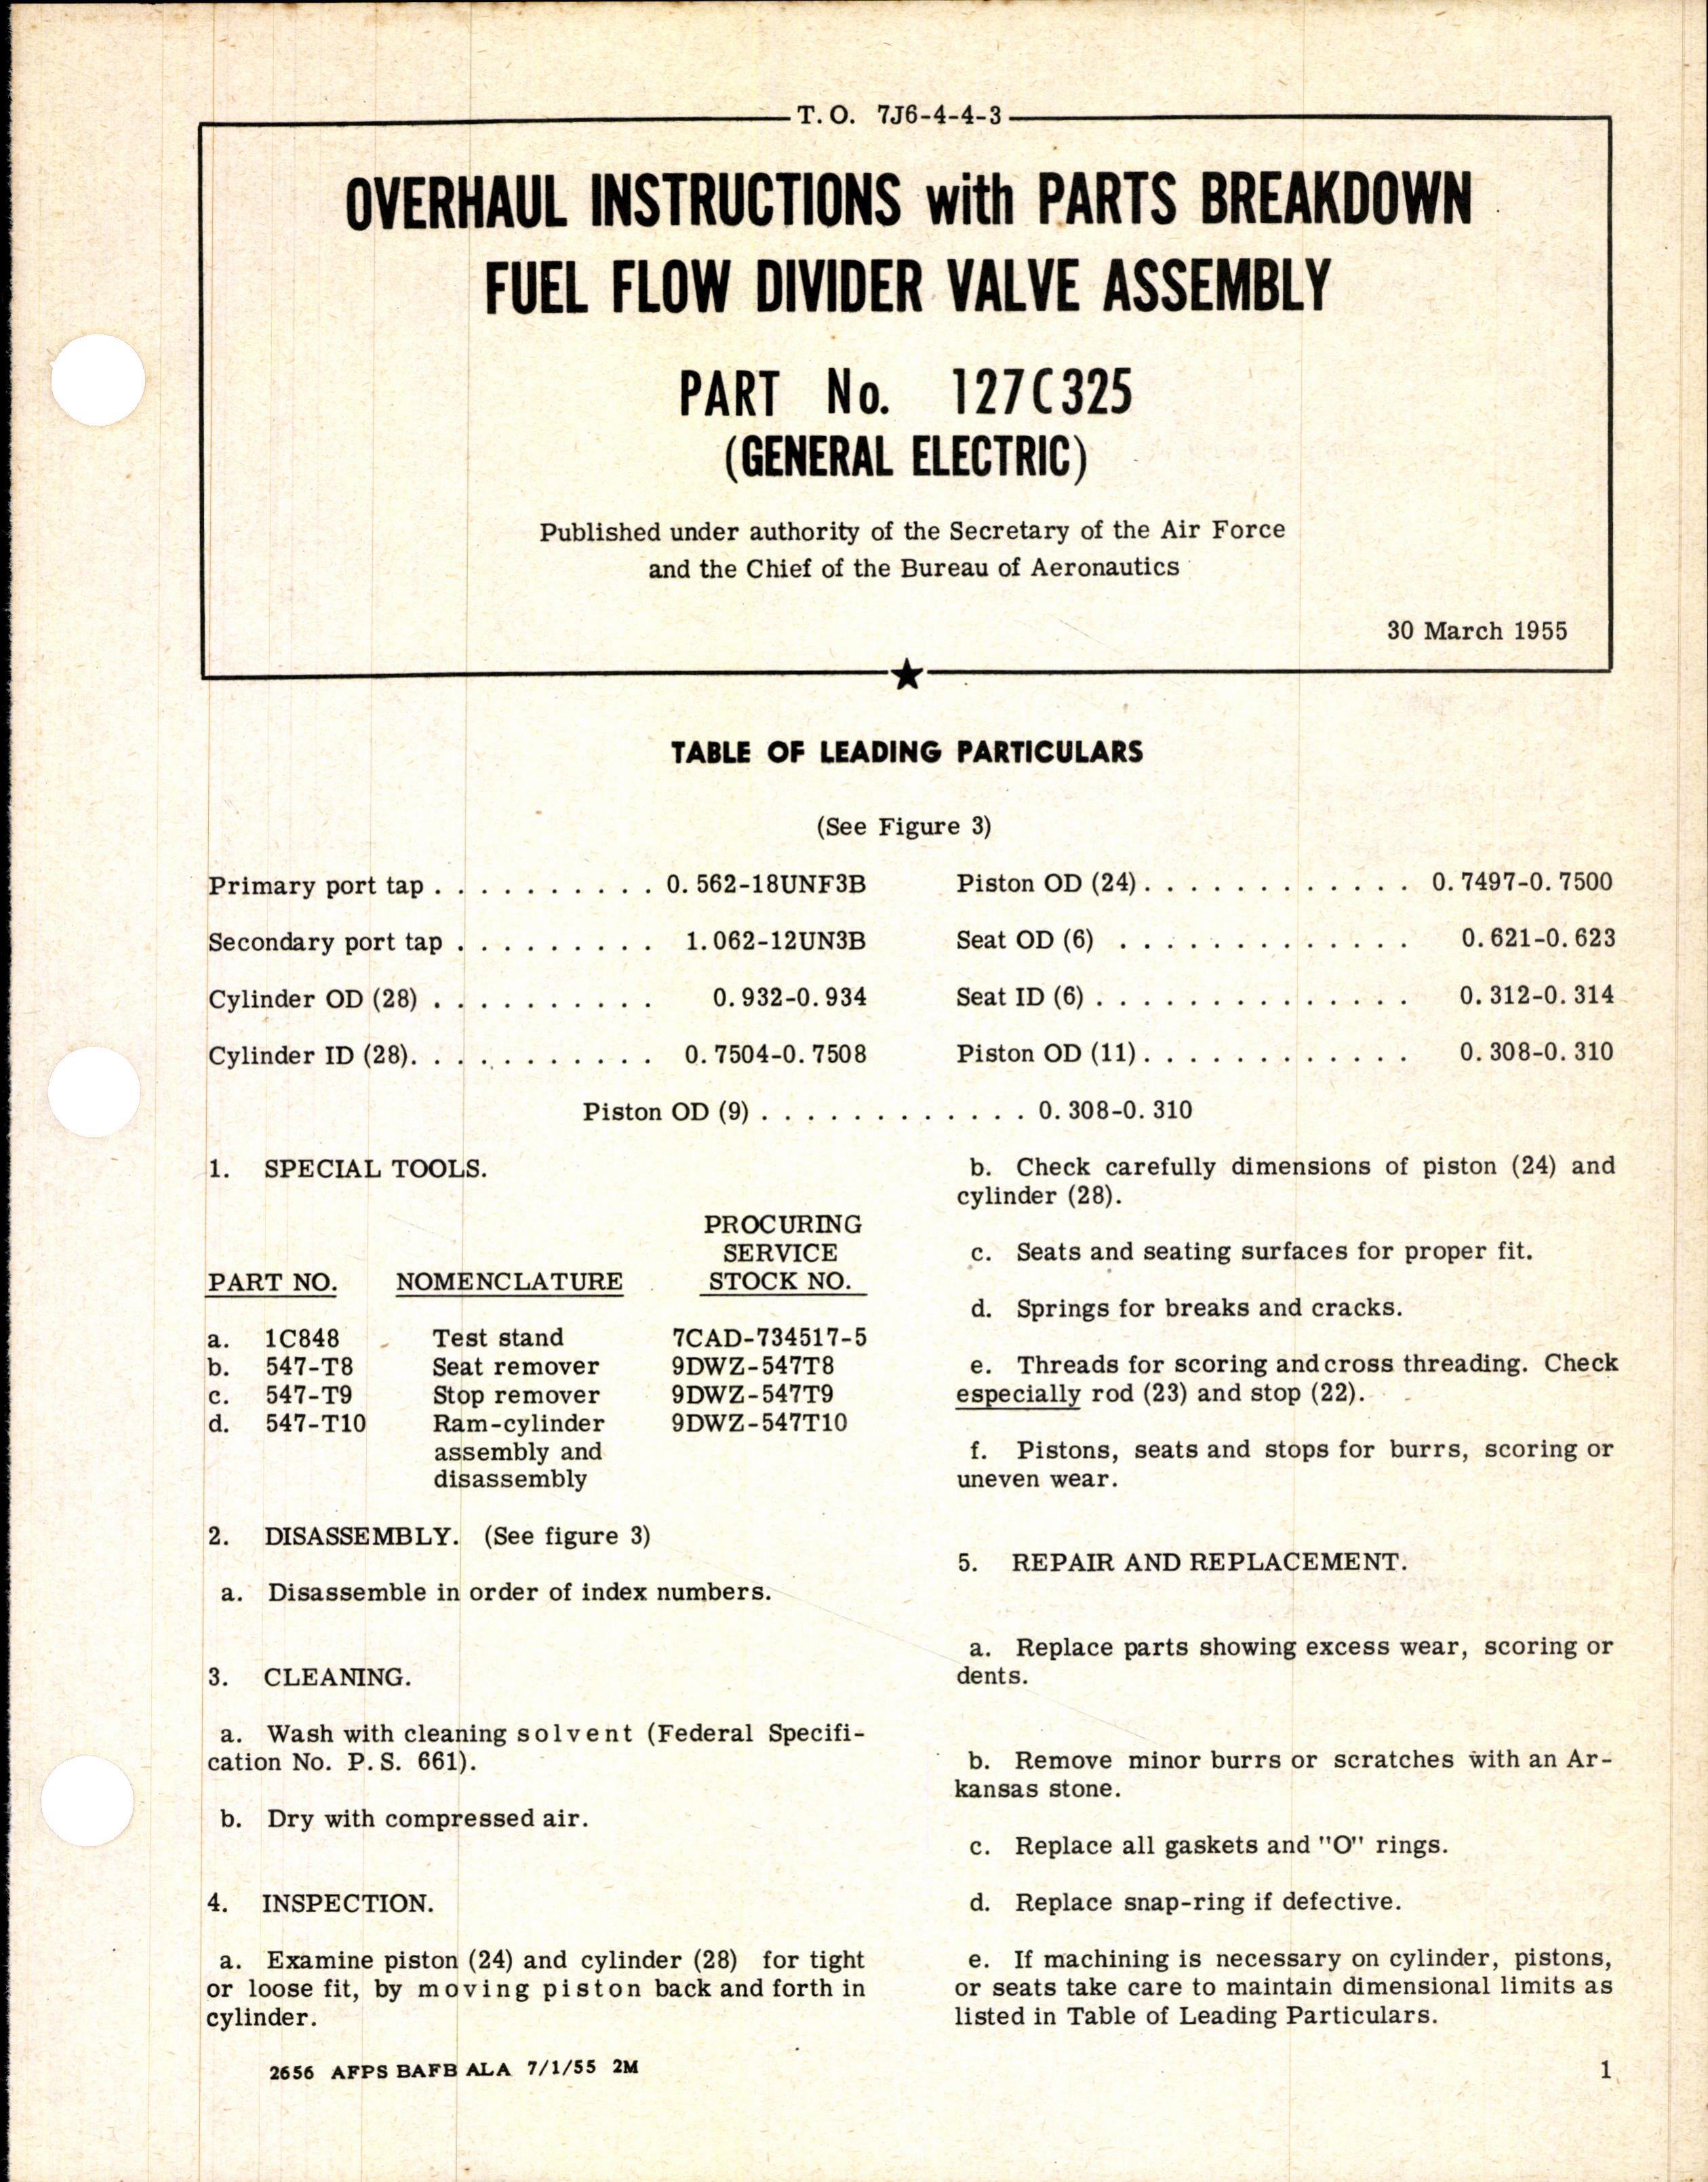 Sample page 1 from AirCorps Library document: Fuel Flow Divider Valve Assembly